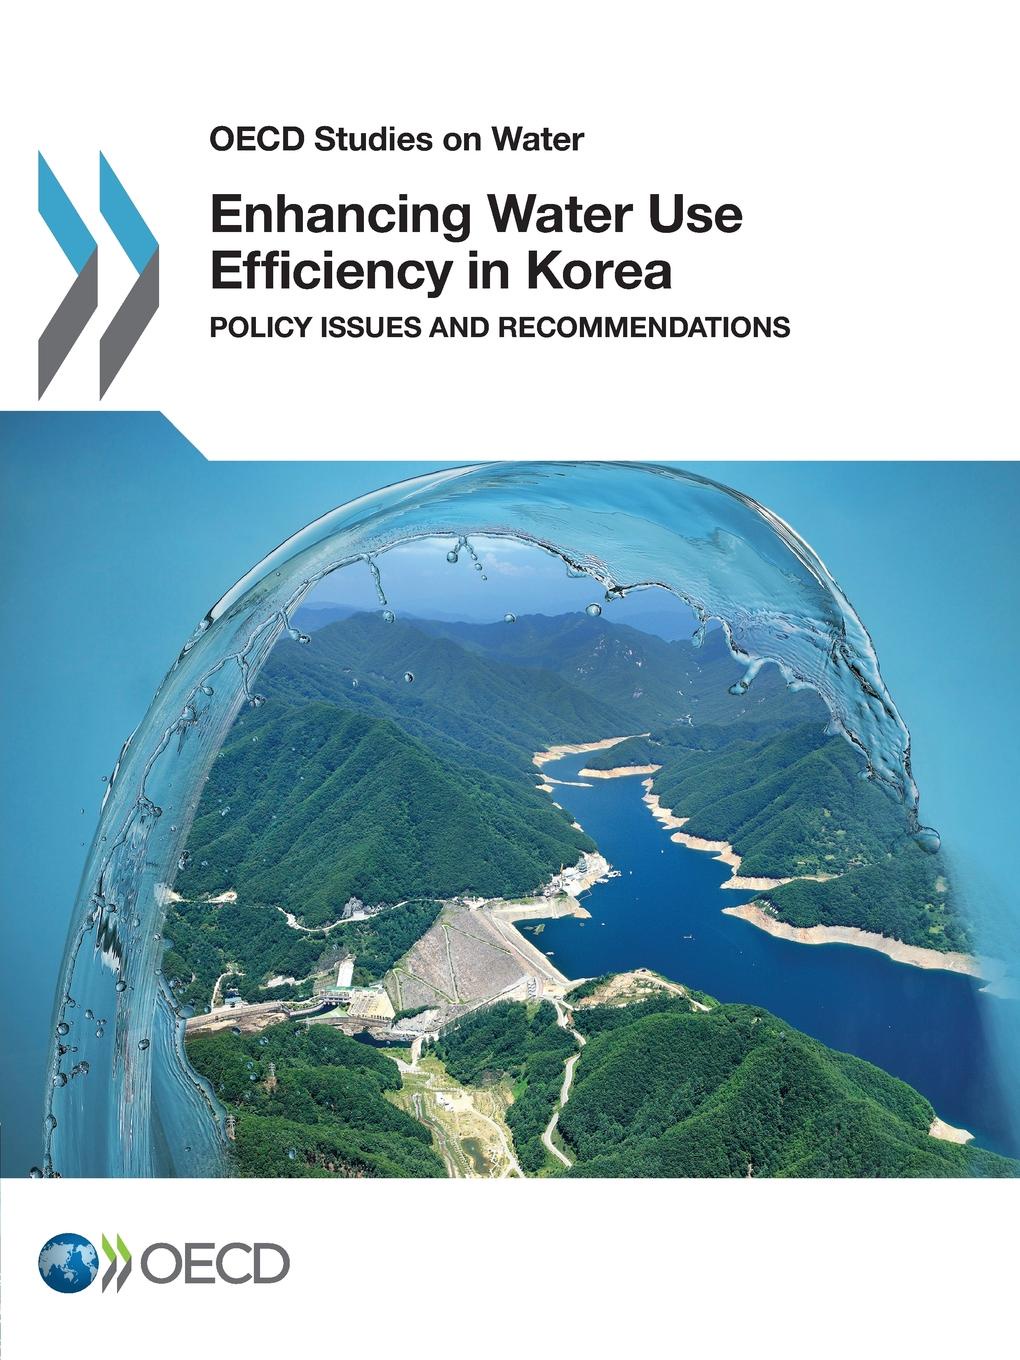 Enhancing Water Use Efficiency in Korea. Policy Issues and Recommendations